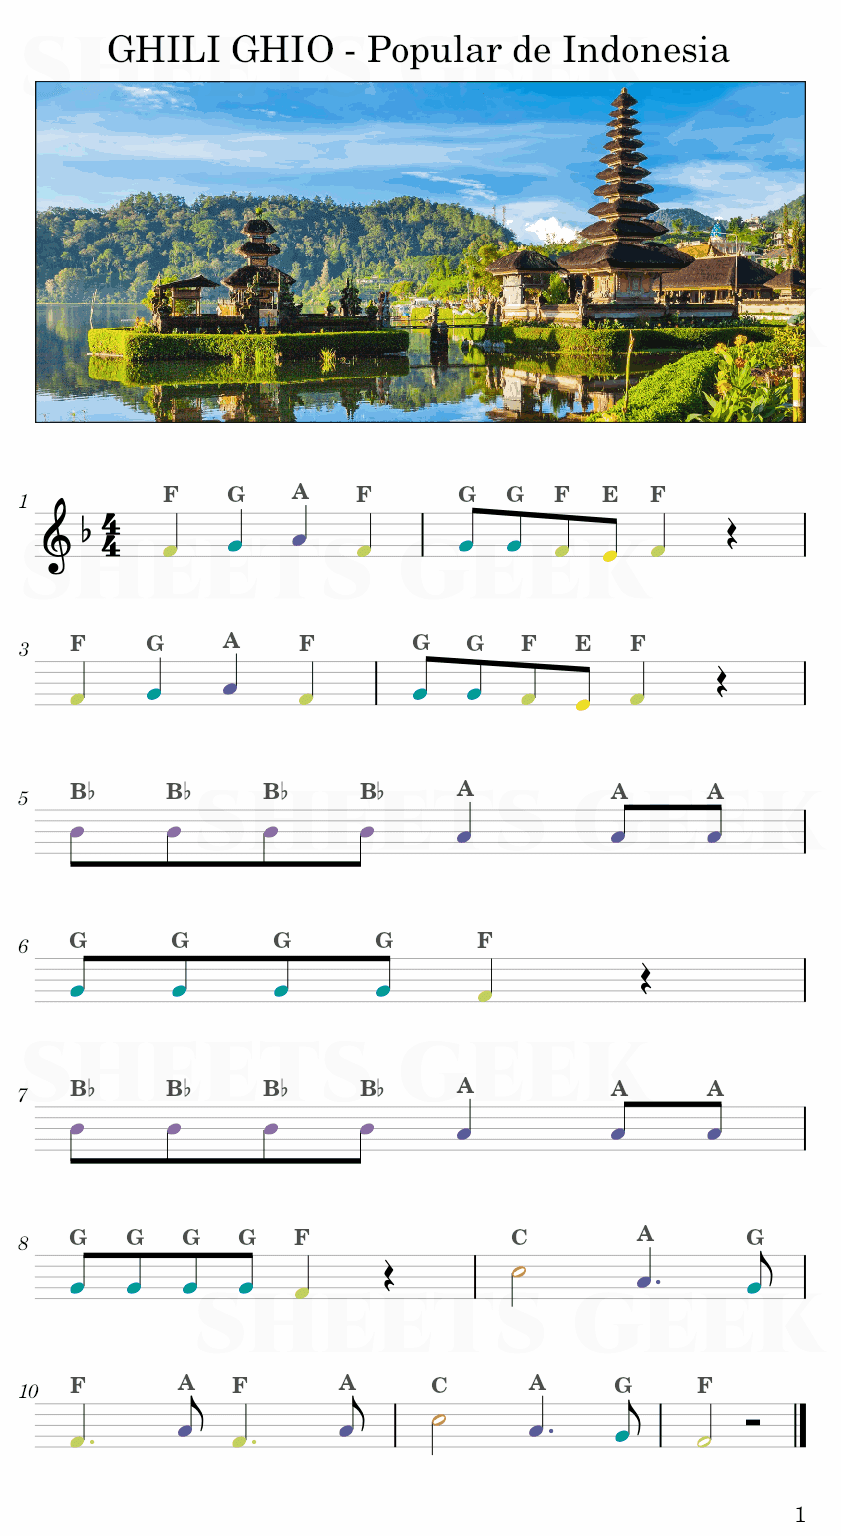 GHILI GHIO - Popular de Indonesia Easy Sheet Music Free for piano, keyboard, flute, violin, sax, cello page 1